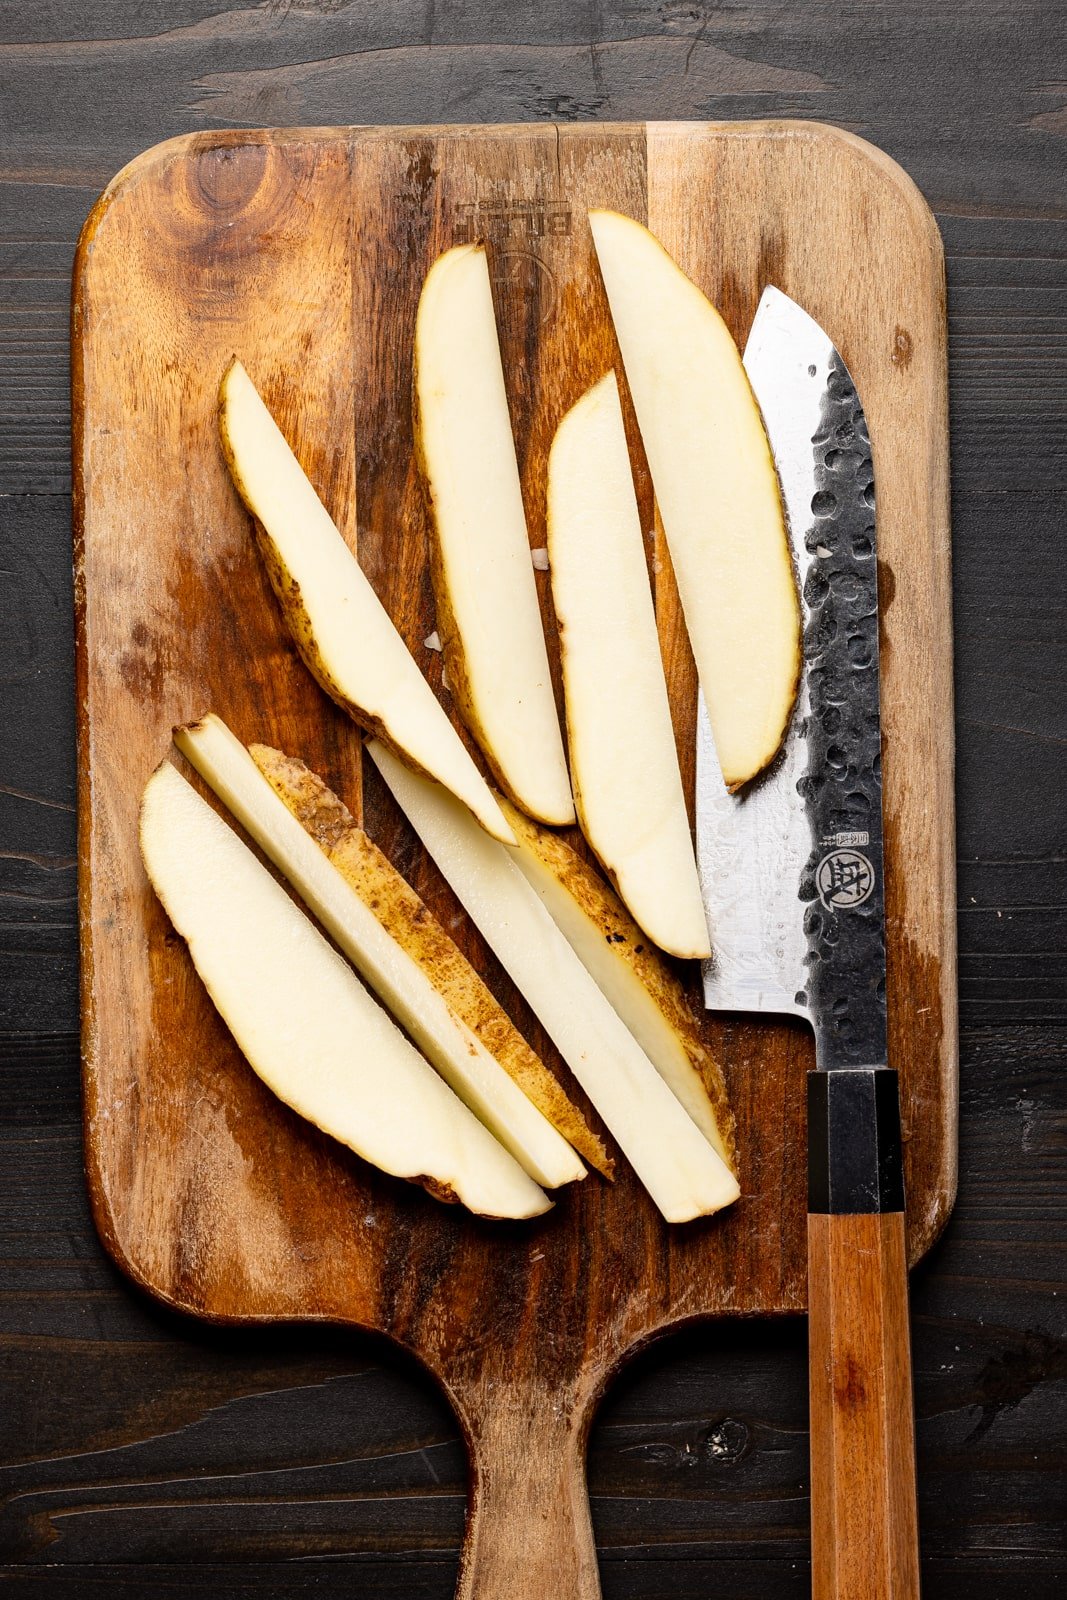 Russet potatoes cut lengthways on a cutting board with knife.